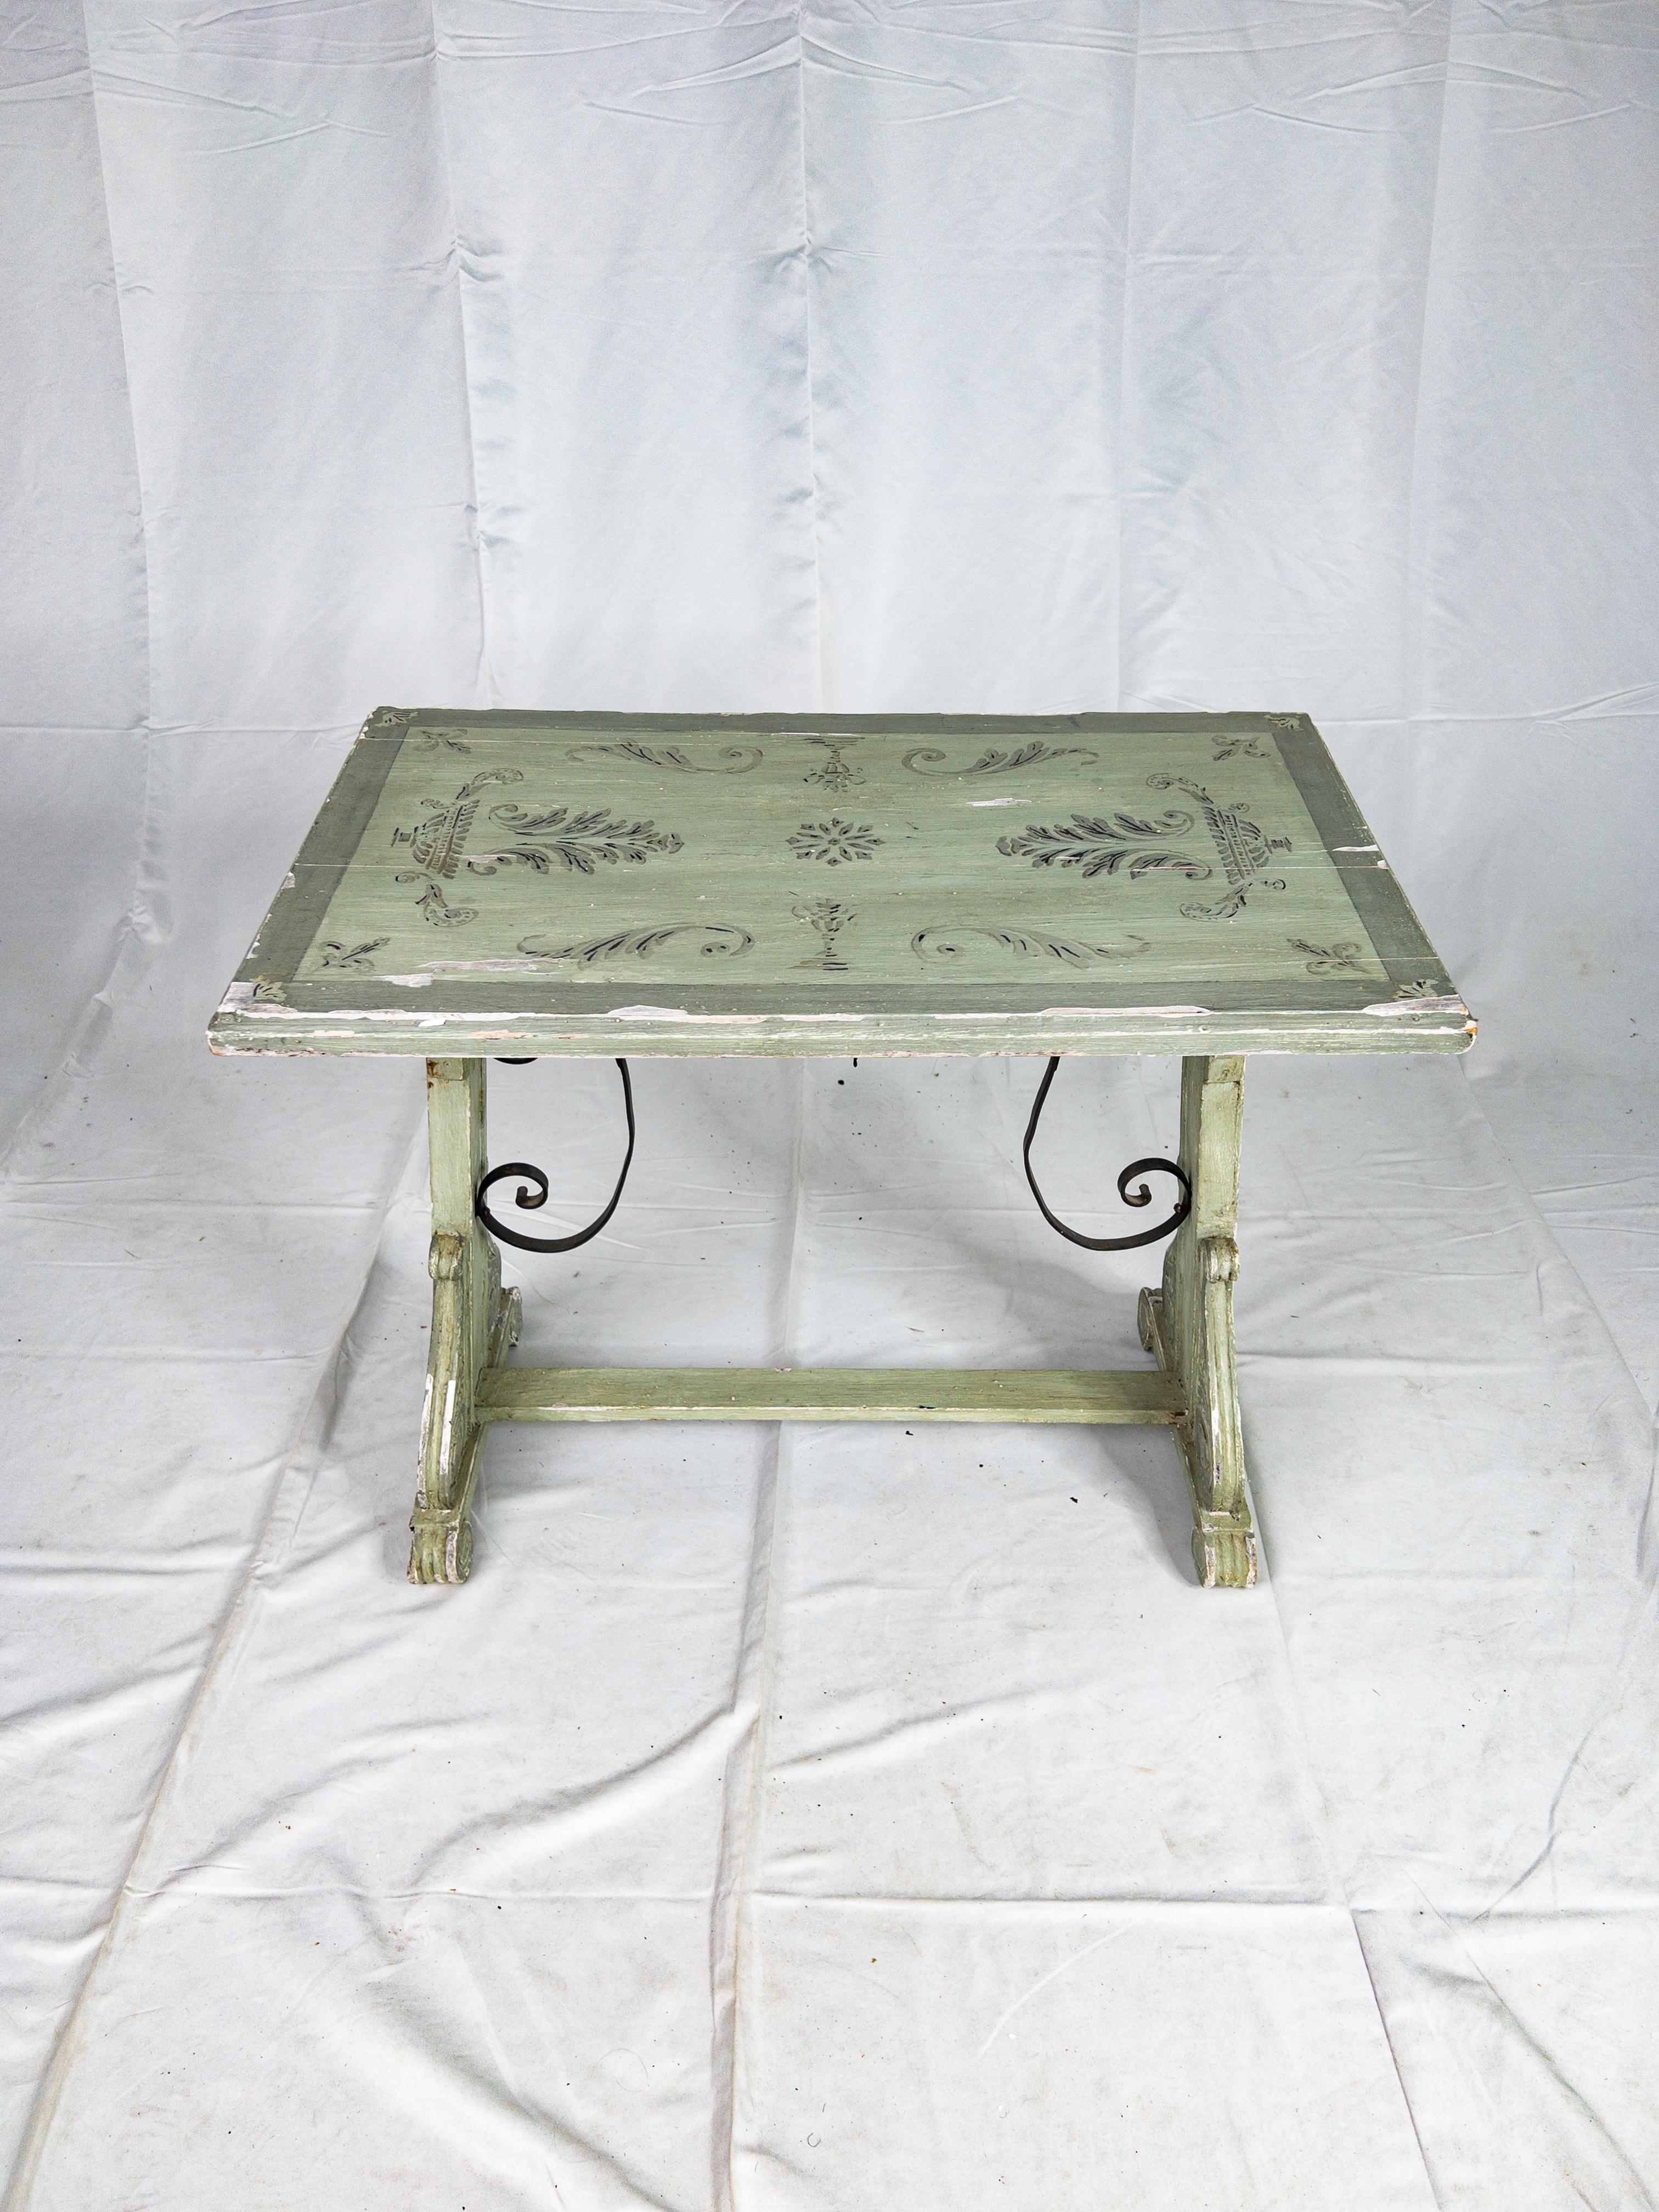 19th Century Painted Italian Side Trestle Table
The 19th Century Painted Italian Side Trestle Table is a captivating fusion of artistry and functionality. Its painted surface exudes a vintage charm, with intricate ironwork embellishments adorning